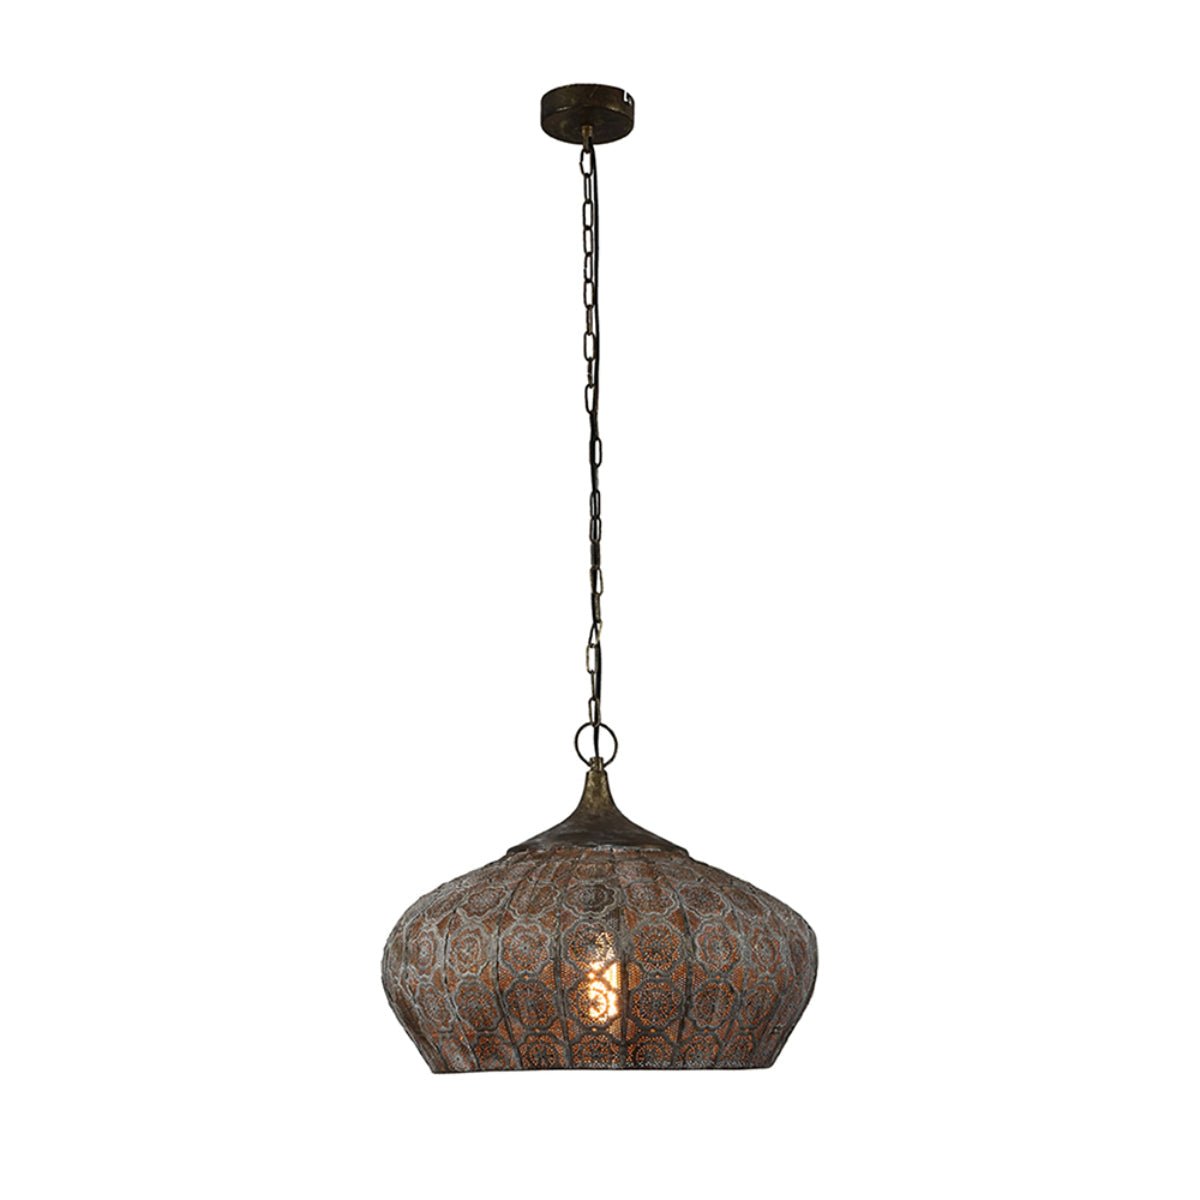 Main image of Brown Gold Metal India Dome Pendant Ceiling Light with E27 | TEKLED 150-18051